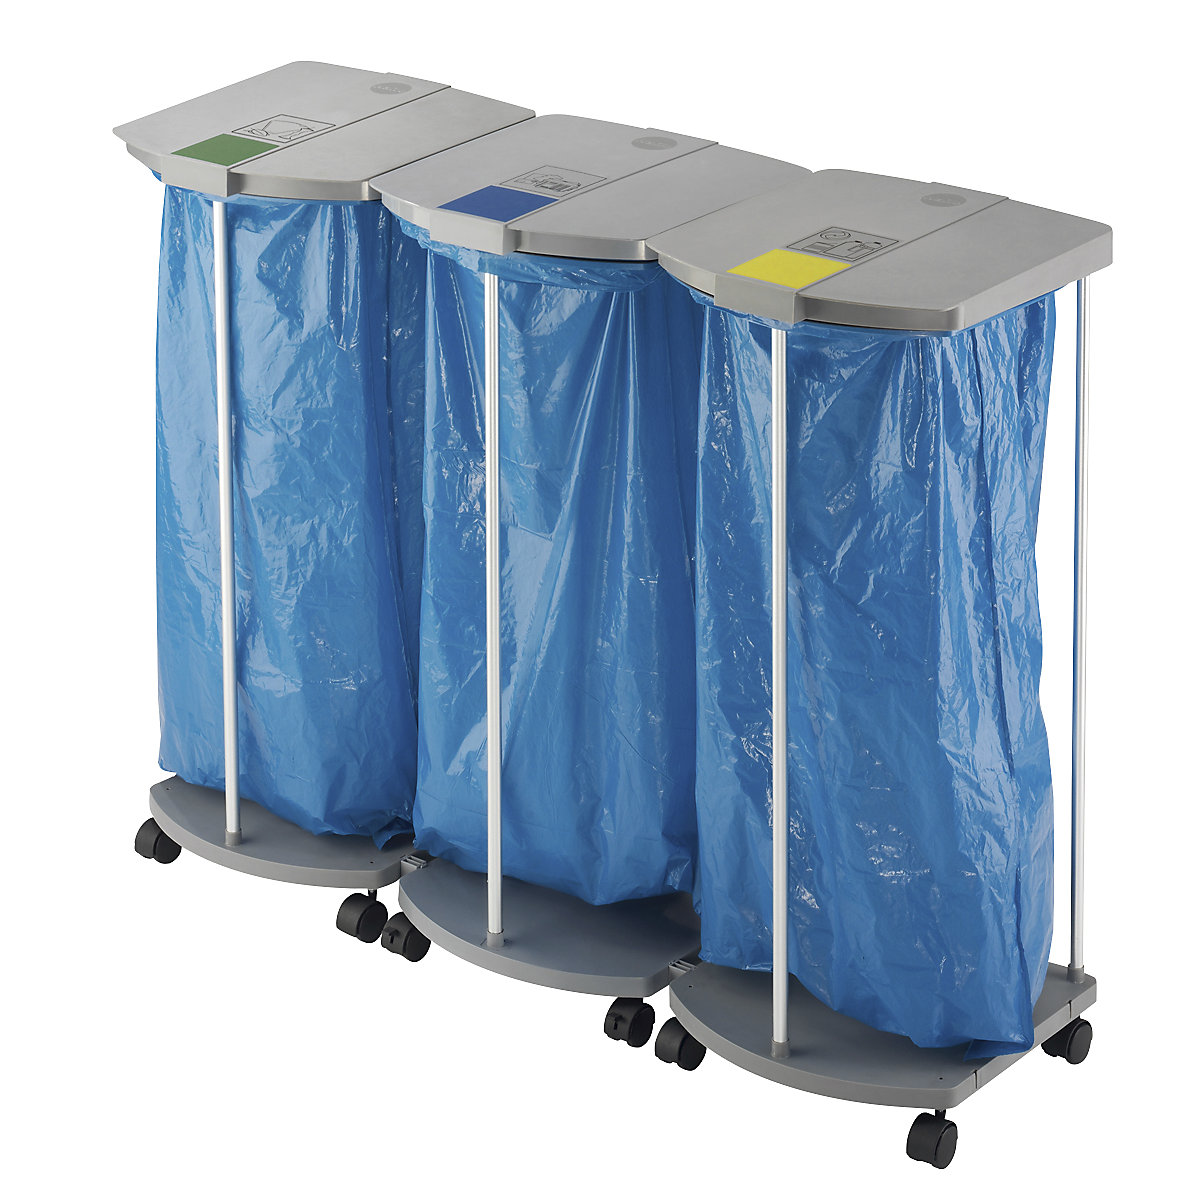 Waste sack stand with 250 blue recycling sacks - Hailo